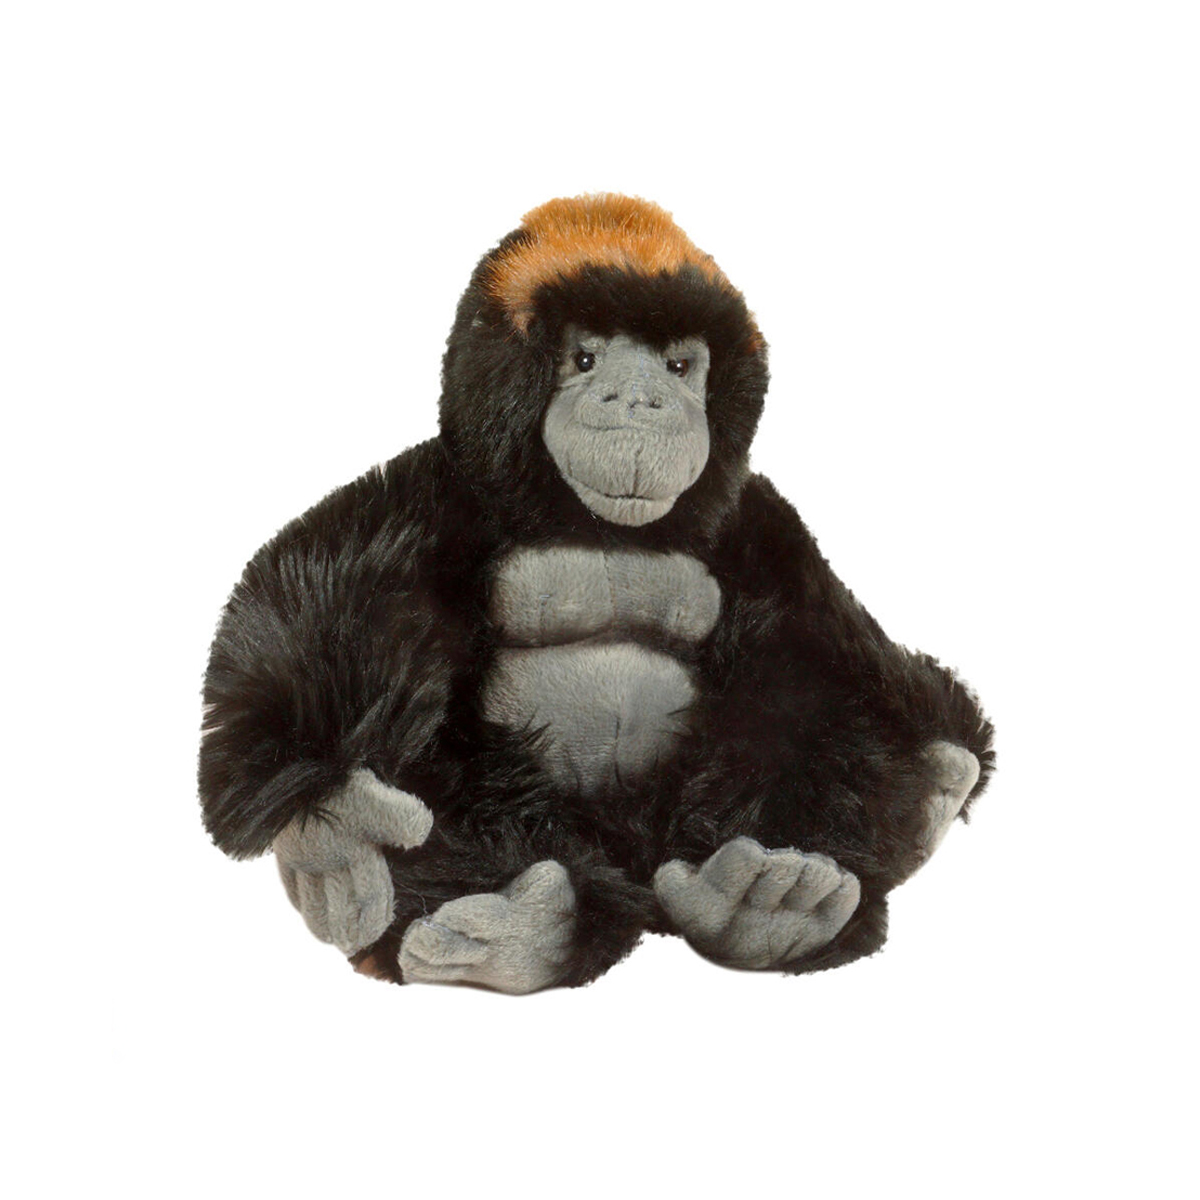 100% recycled. KeelEco 20 cm Silverback Gorilla soft toy by Keel Toys 